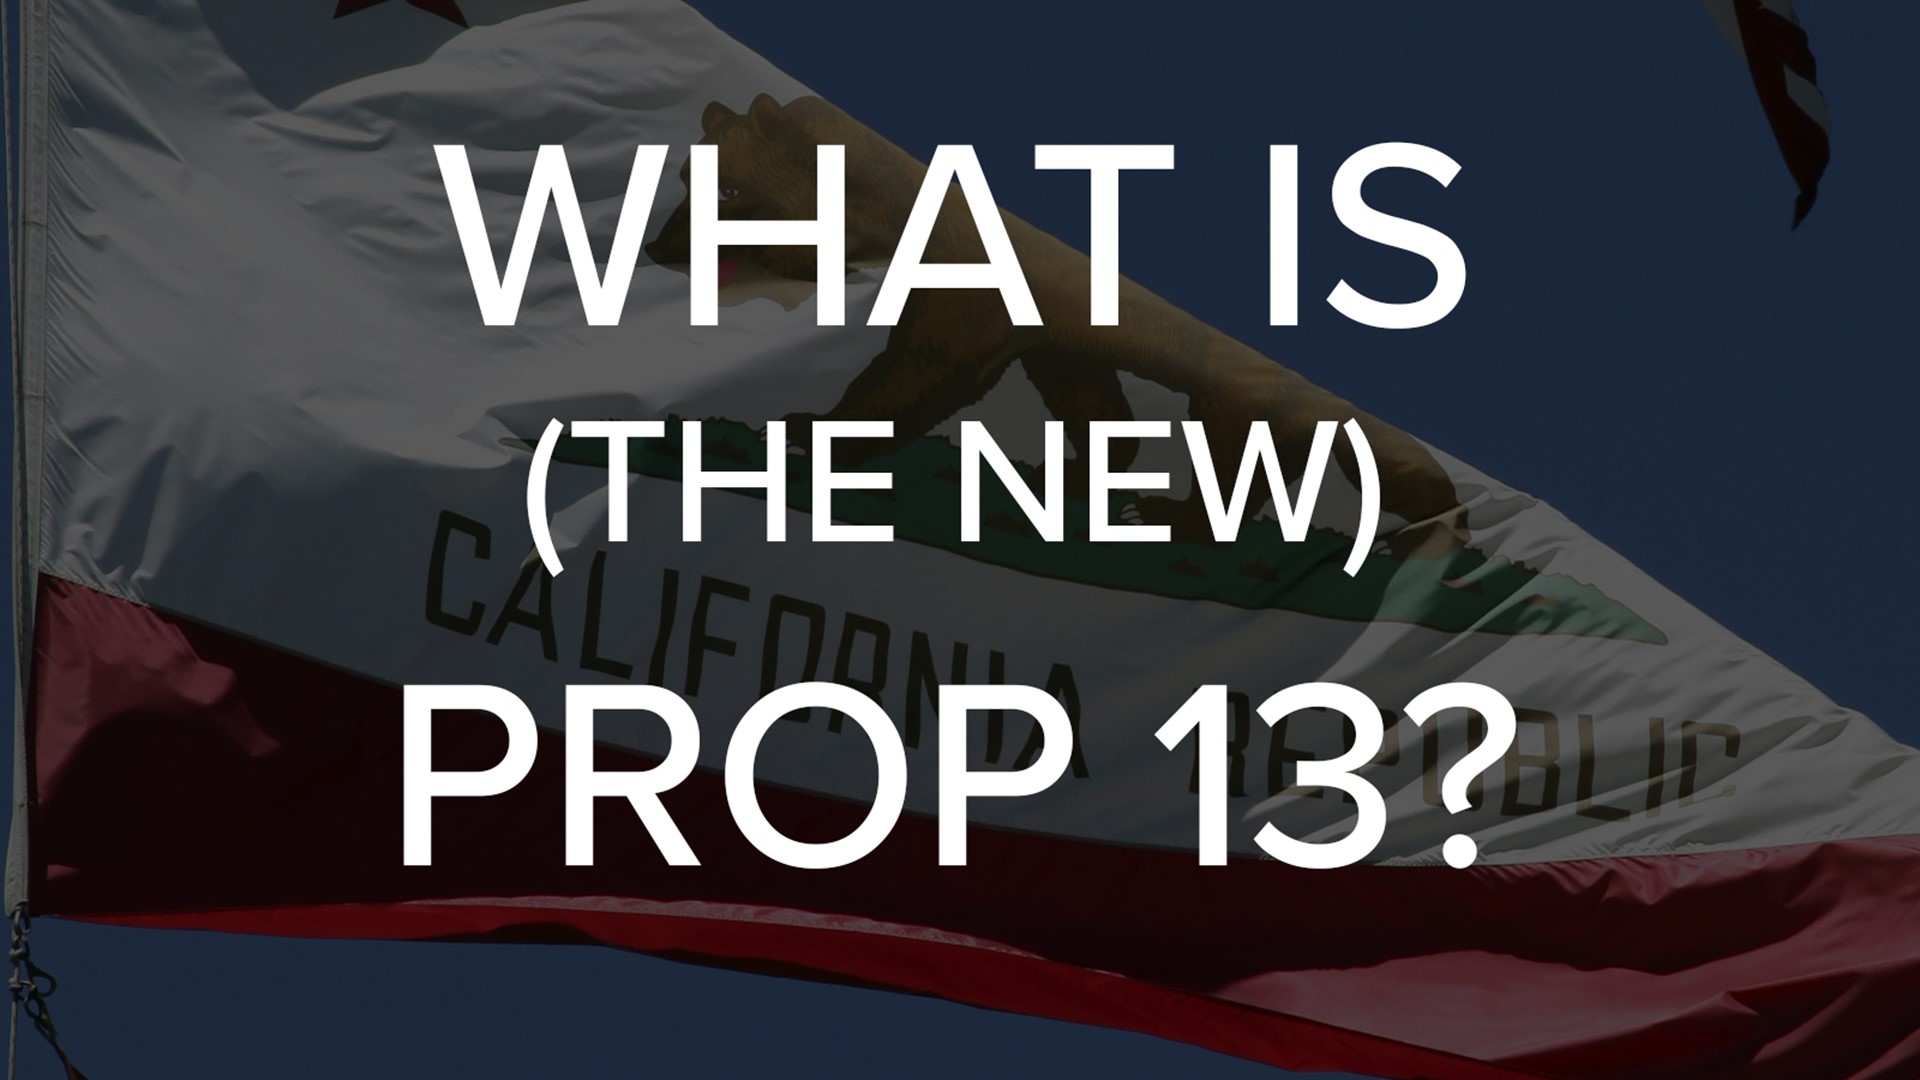 A new proposition 13 is causing confusion for voters in California. This latest Prop 13 is on the March 2020 ballot and authorizes bonds for schools.